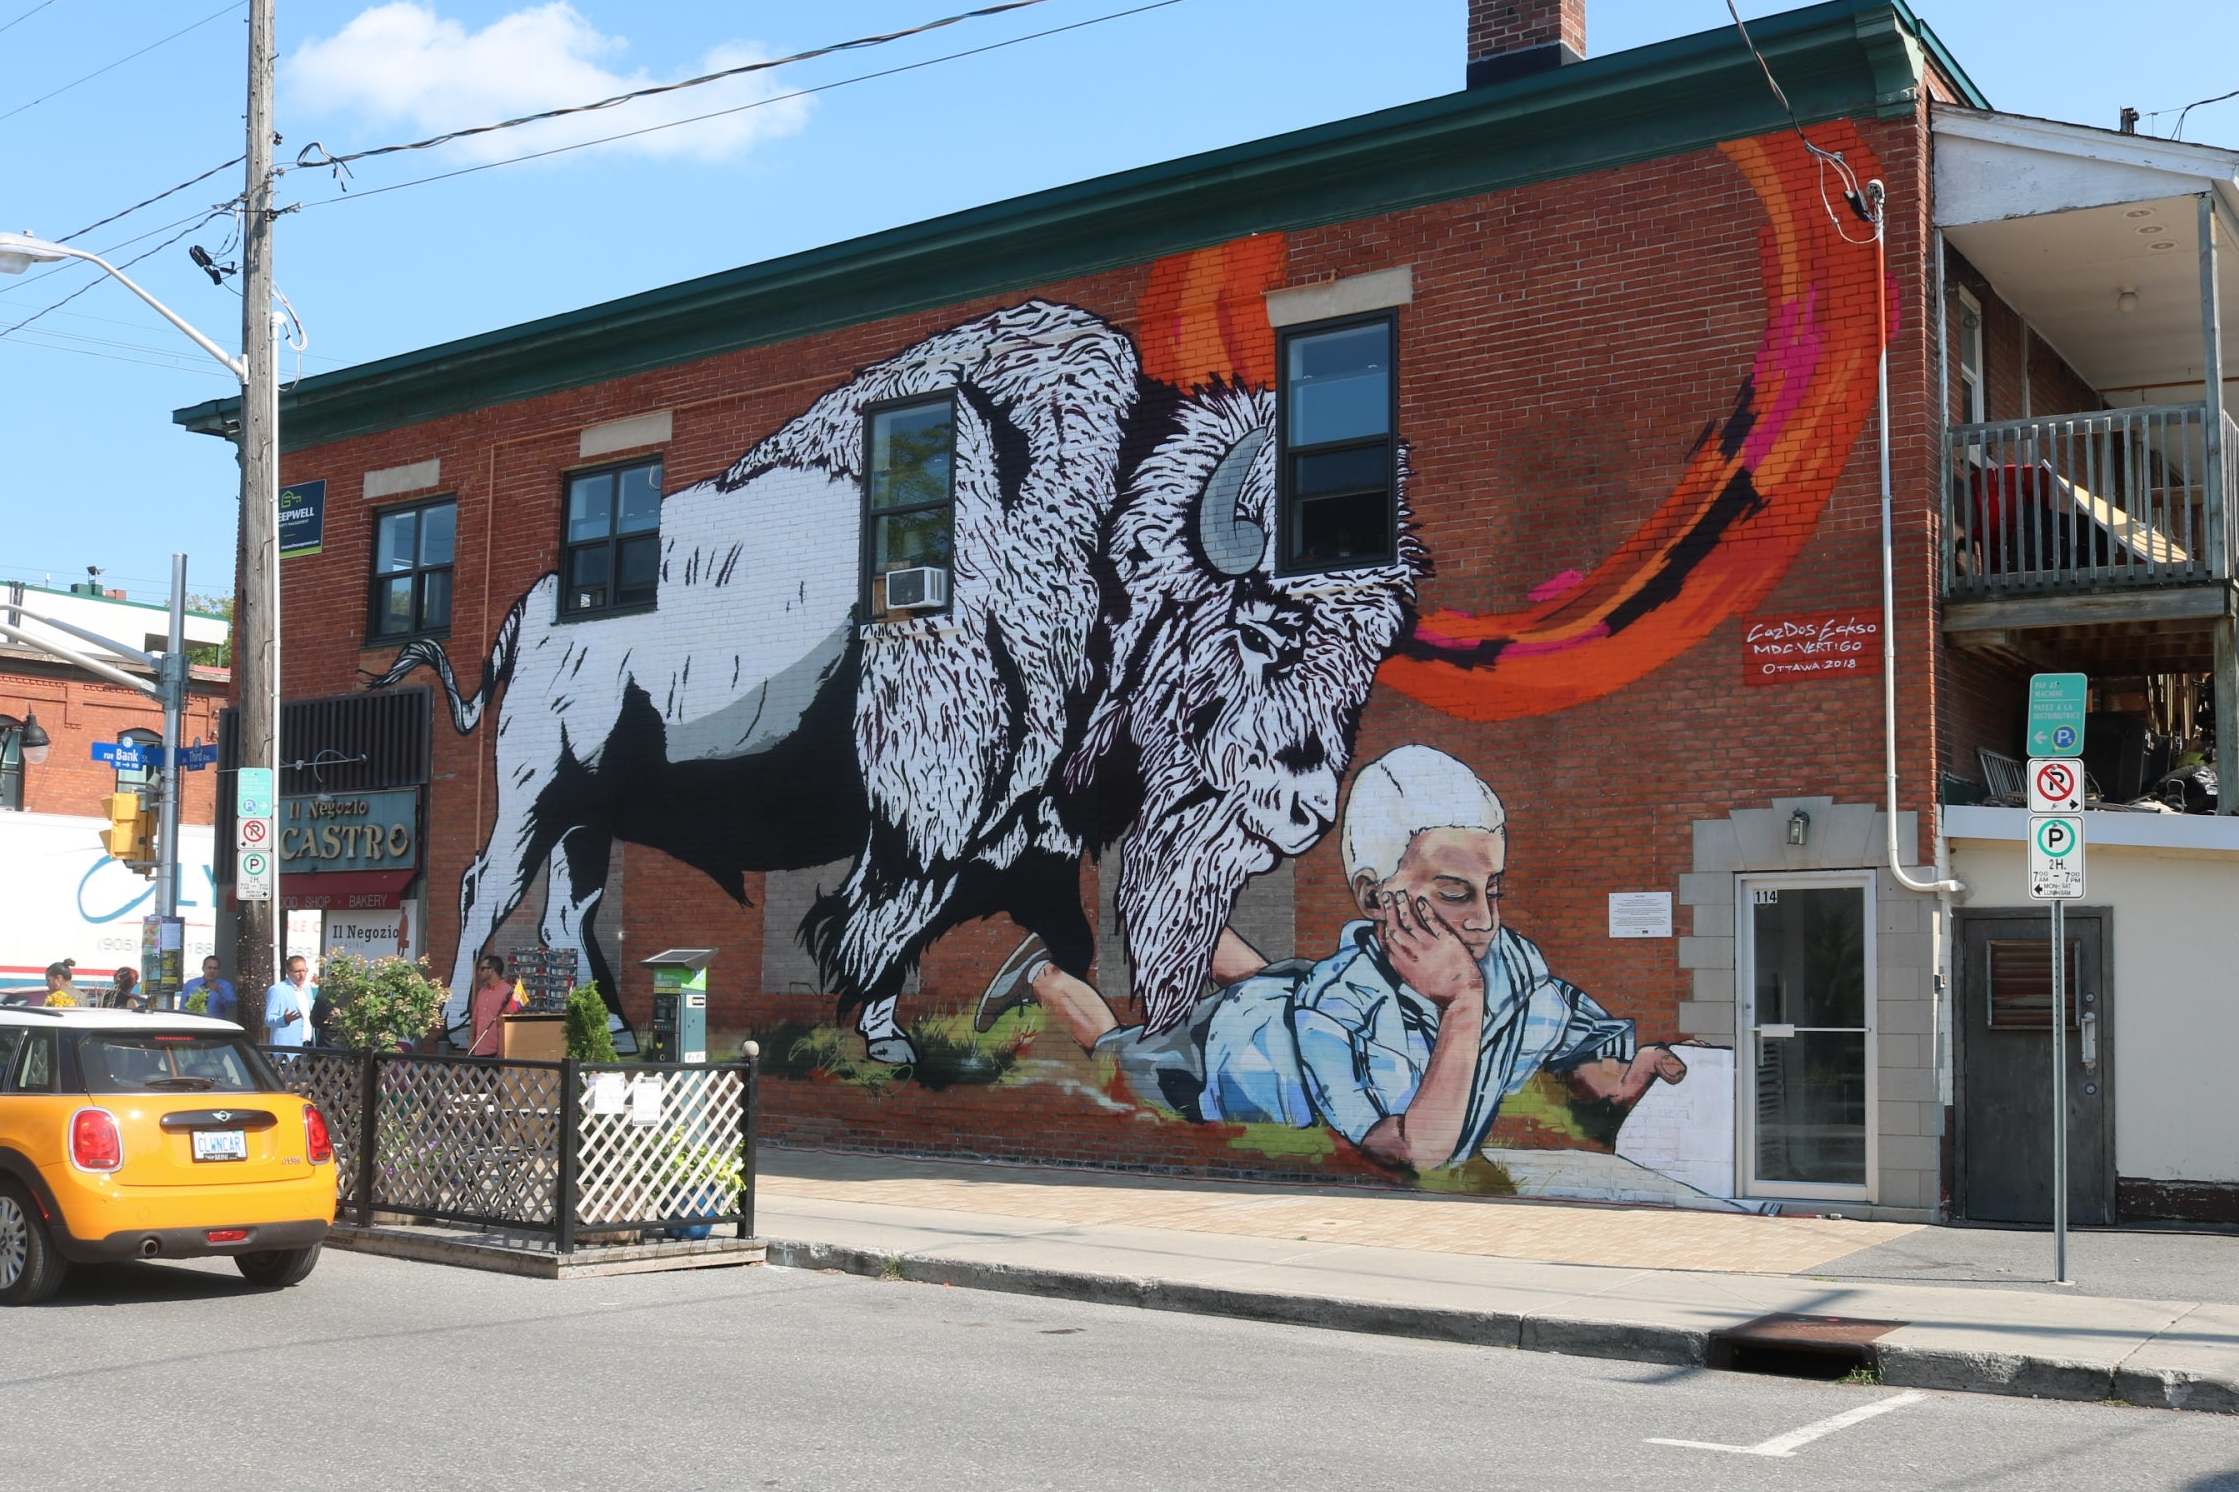 The crew’s graffiti has stretched continents – as seen here in Canada